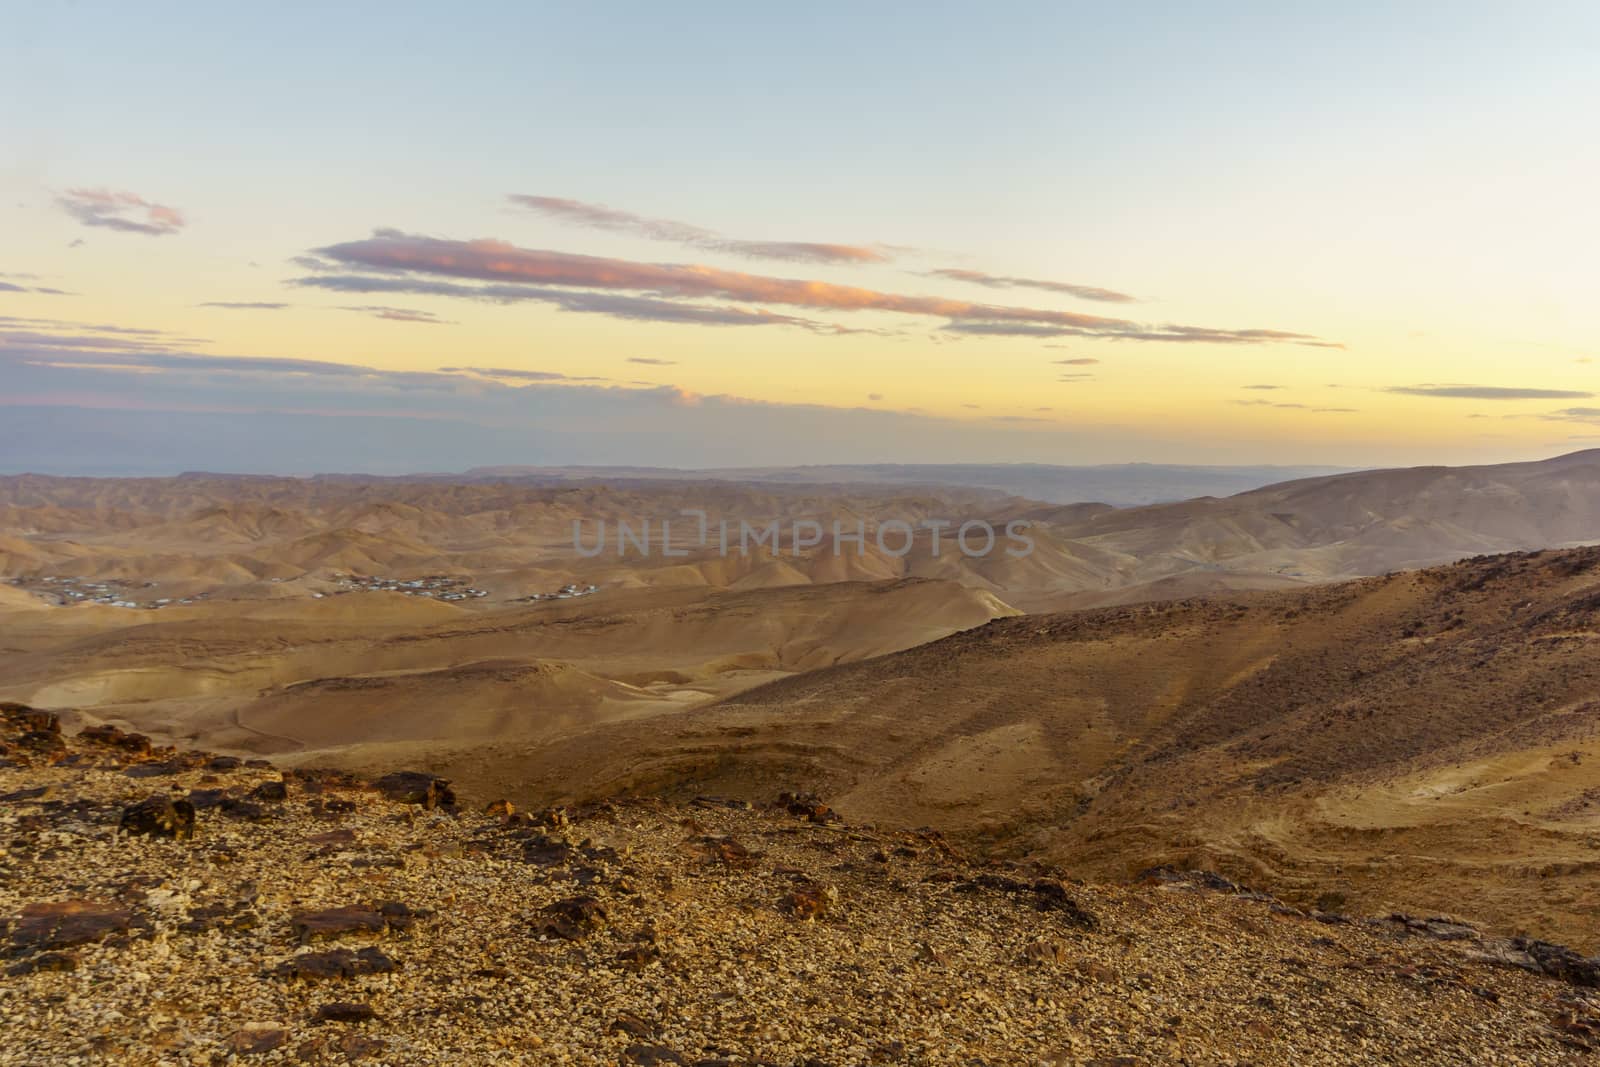 Sunset view of the Judaean Desert and the Dead Sea by RnDmS